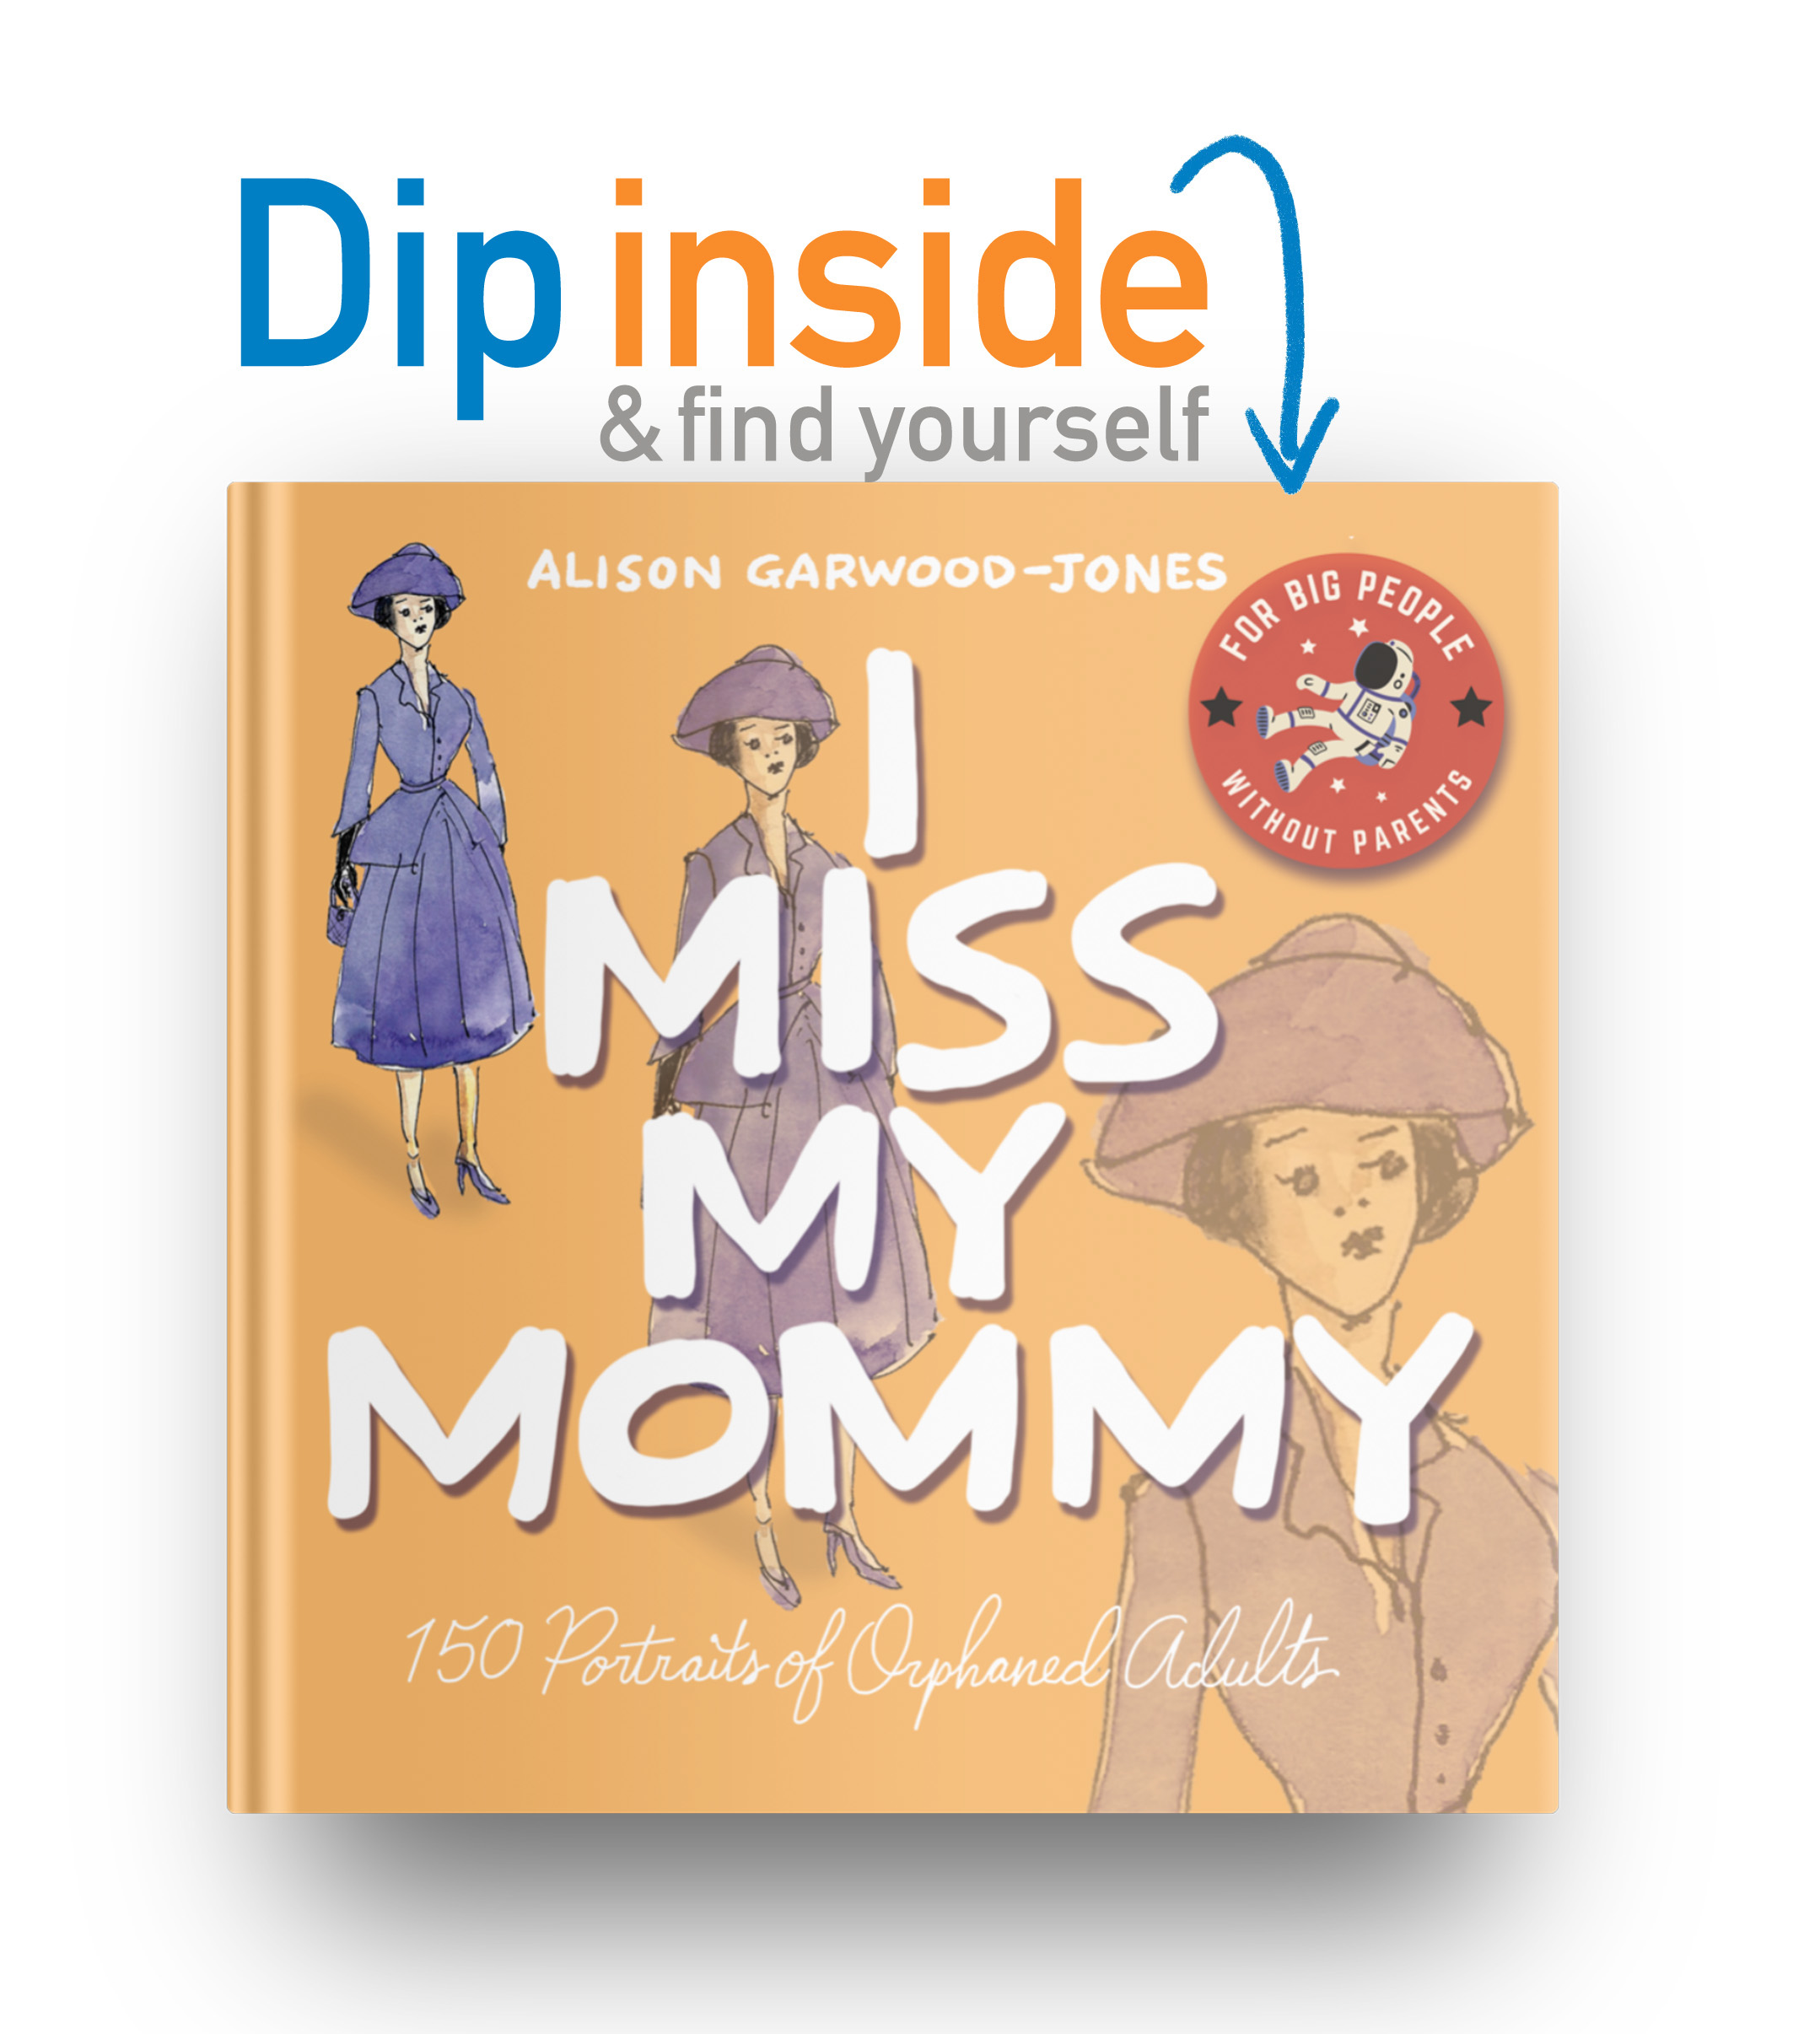 New Book - I Miss My Mommy:150 Portraits of Orphaned Adults by Alison Garwood-Jones